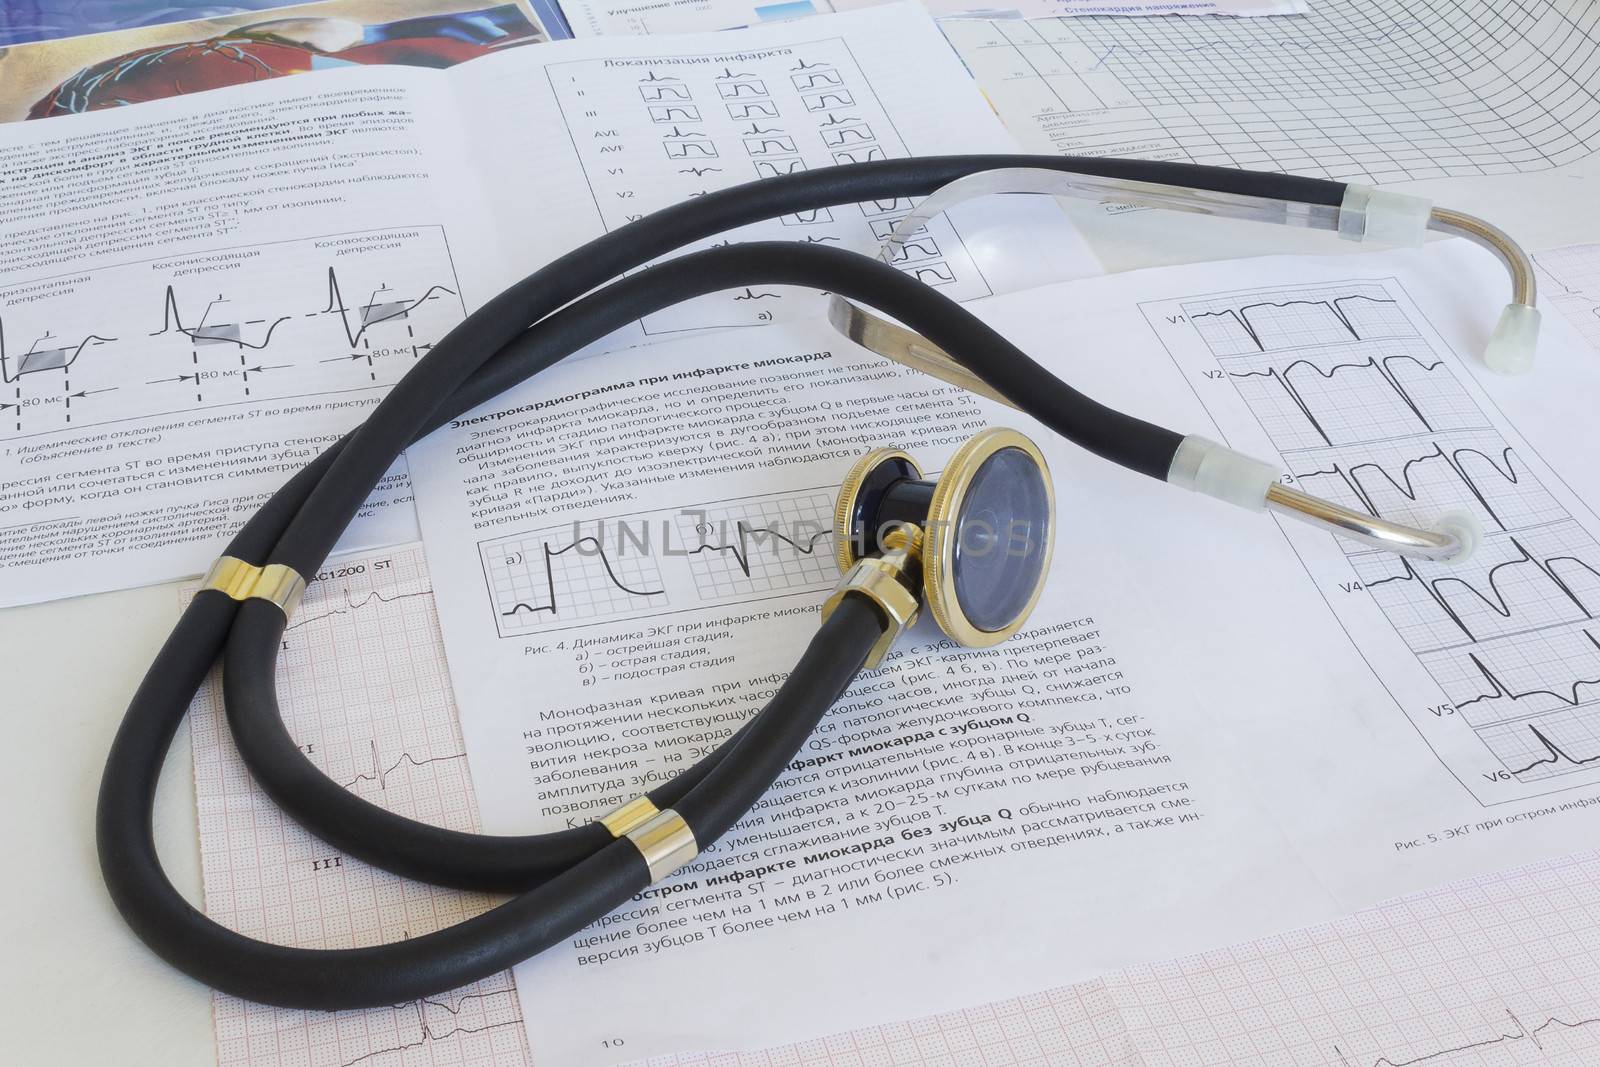 The tool of the doctor for inspection of patients - ��������������������������������, and medical literature.

